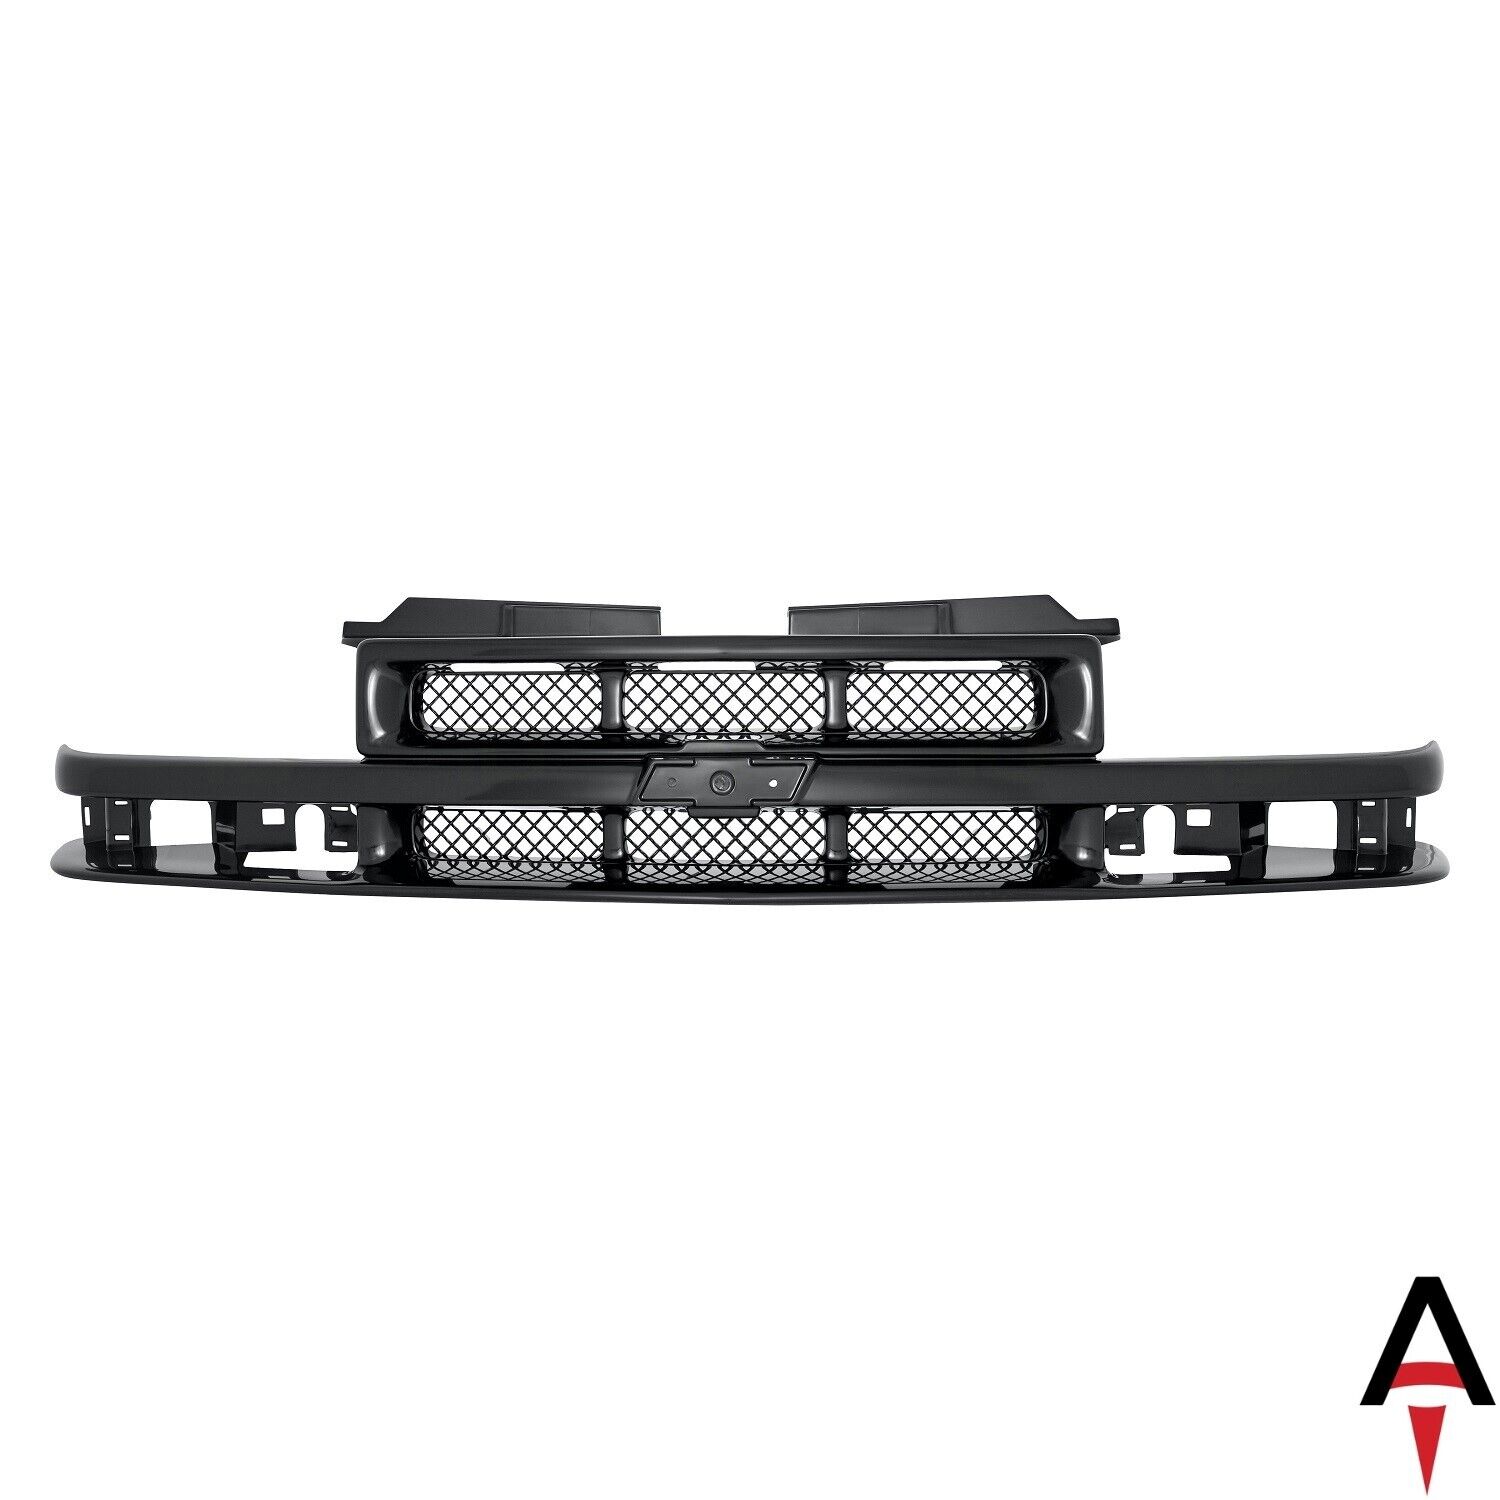 Prime Black Grille Assembly without Molding For 1998-2004 Chevrolet S10 Blazer